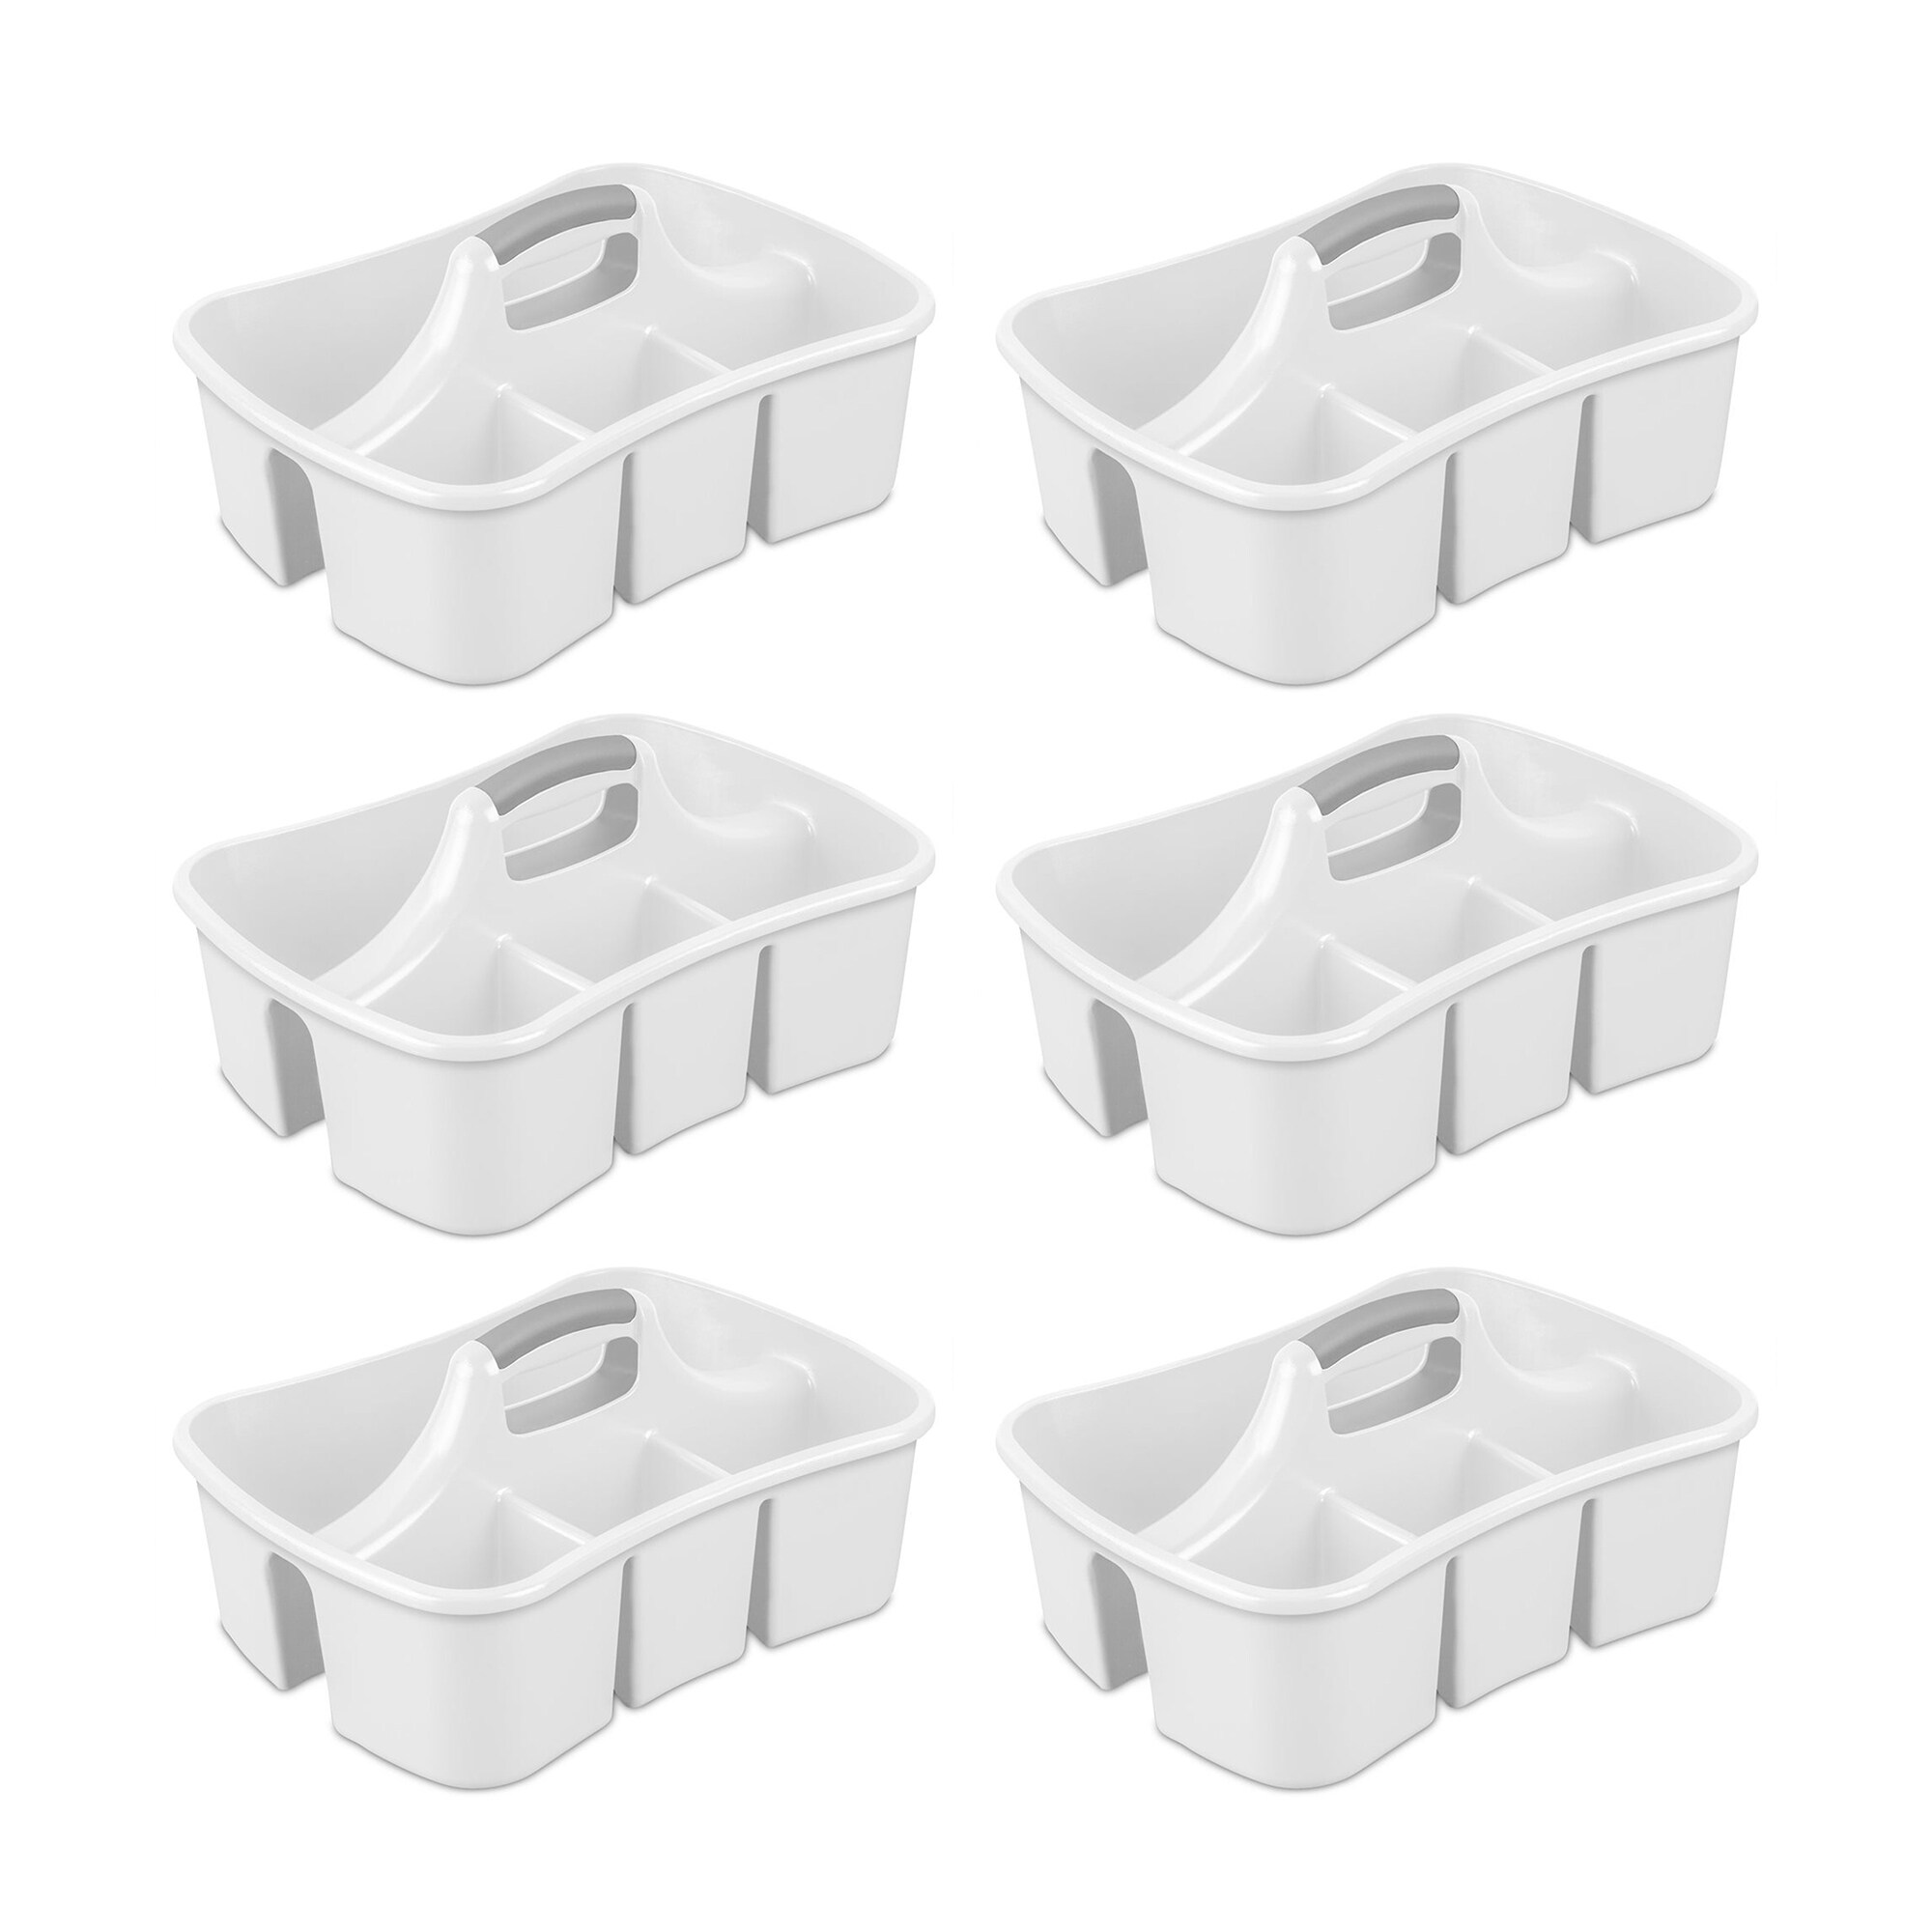 Sterilite White Cleaning Caddy